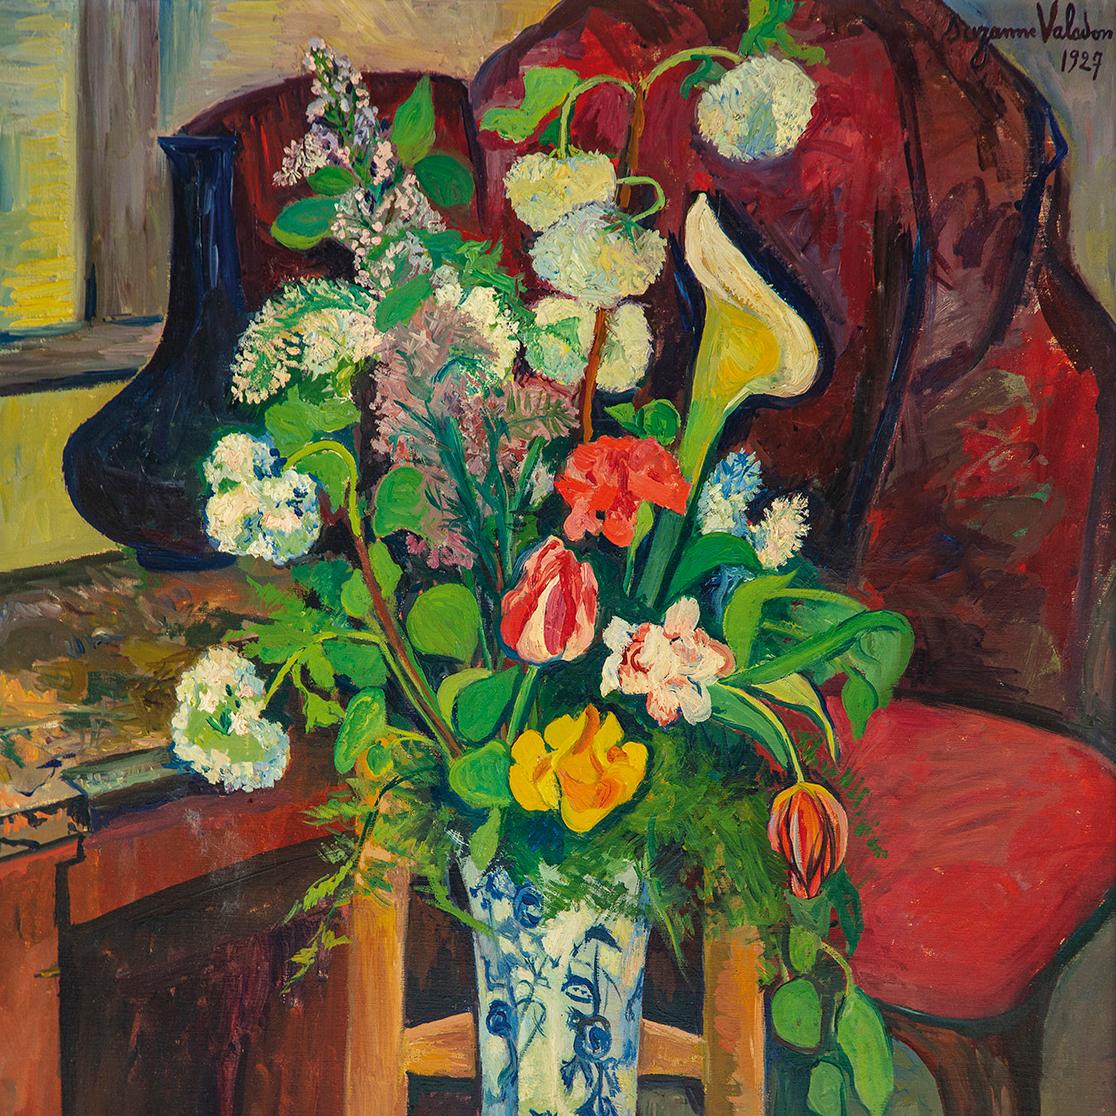 Flowers for Suzanne Valadon - Pre-sale